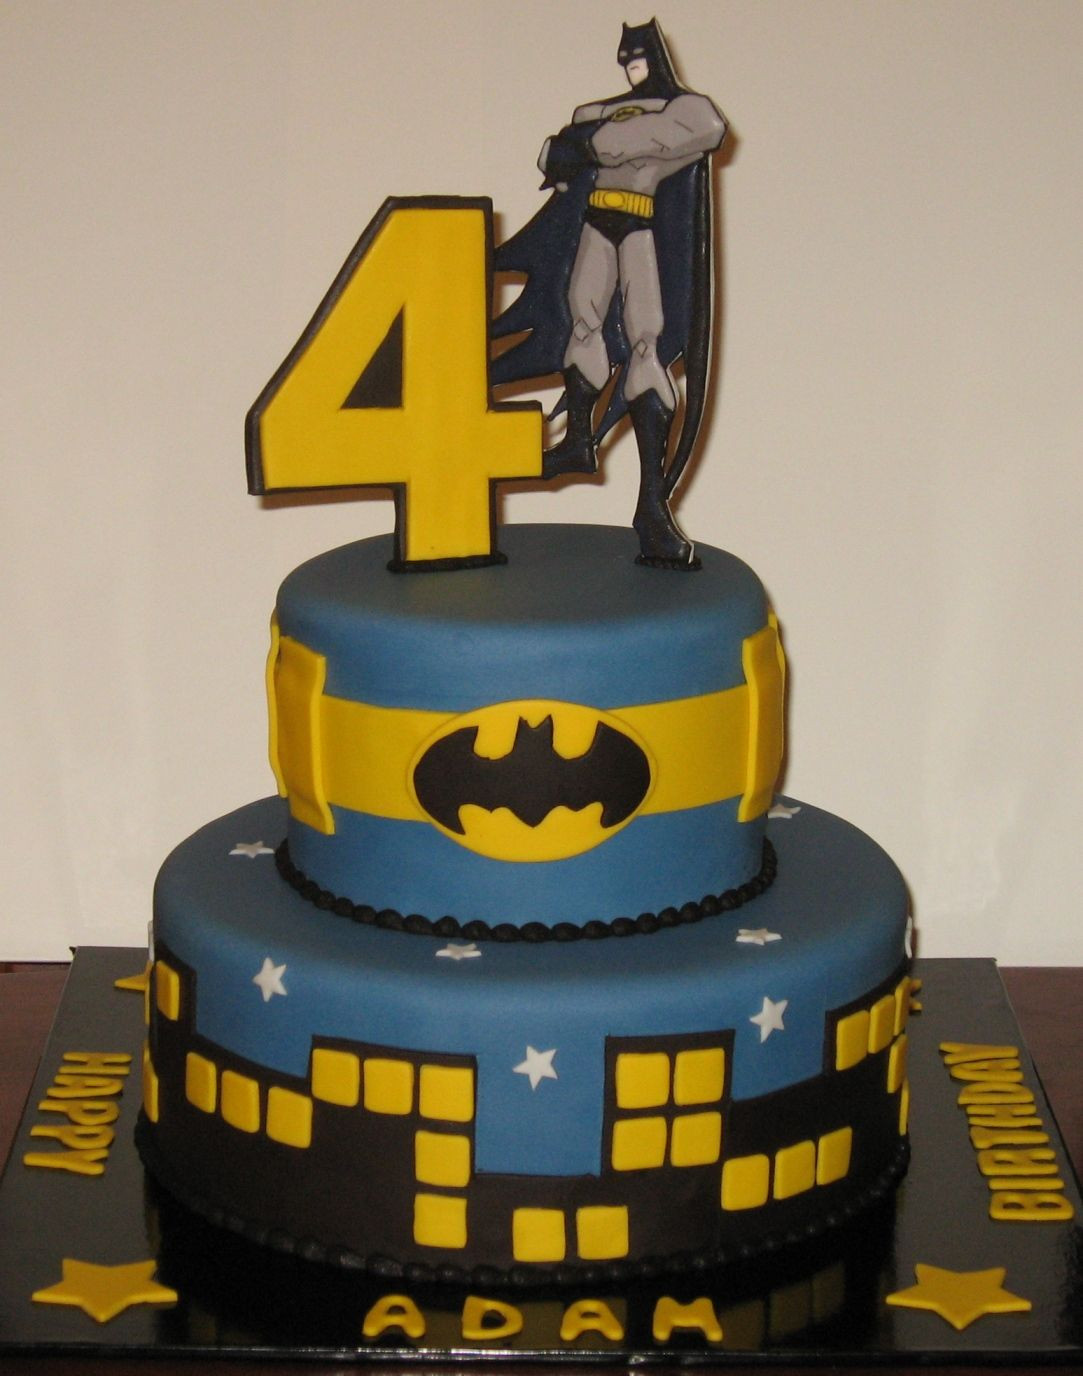 Batman Birthday Party Ideas 4 Year Old
 Is it bad that I want a cake made for 4 year olds